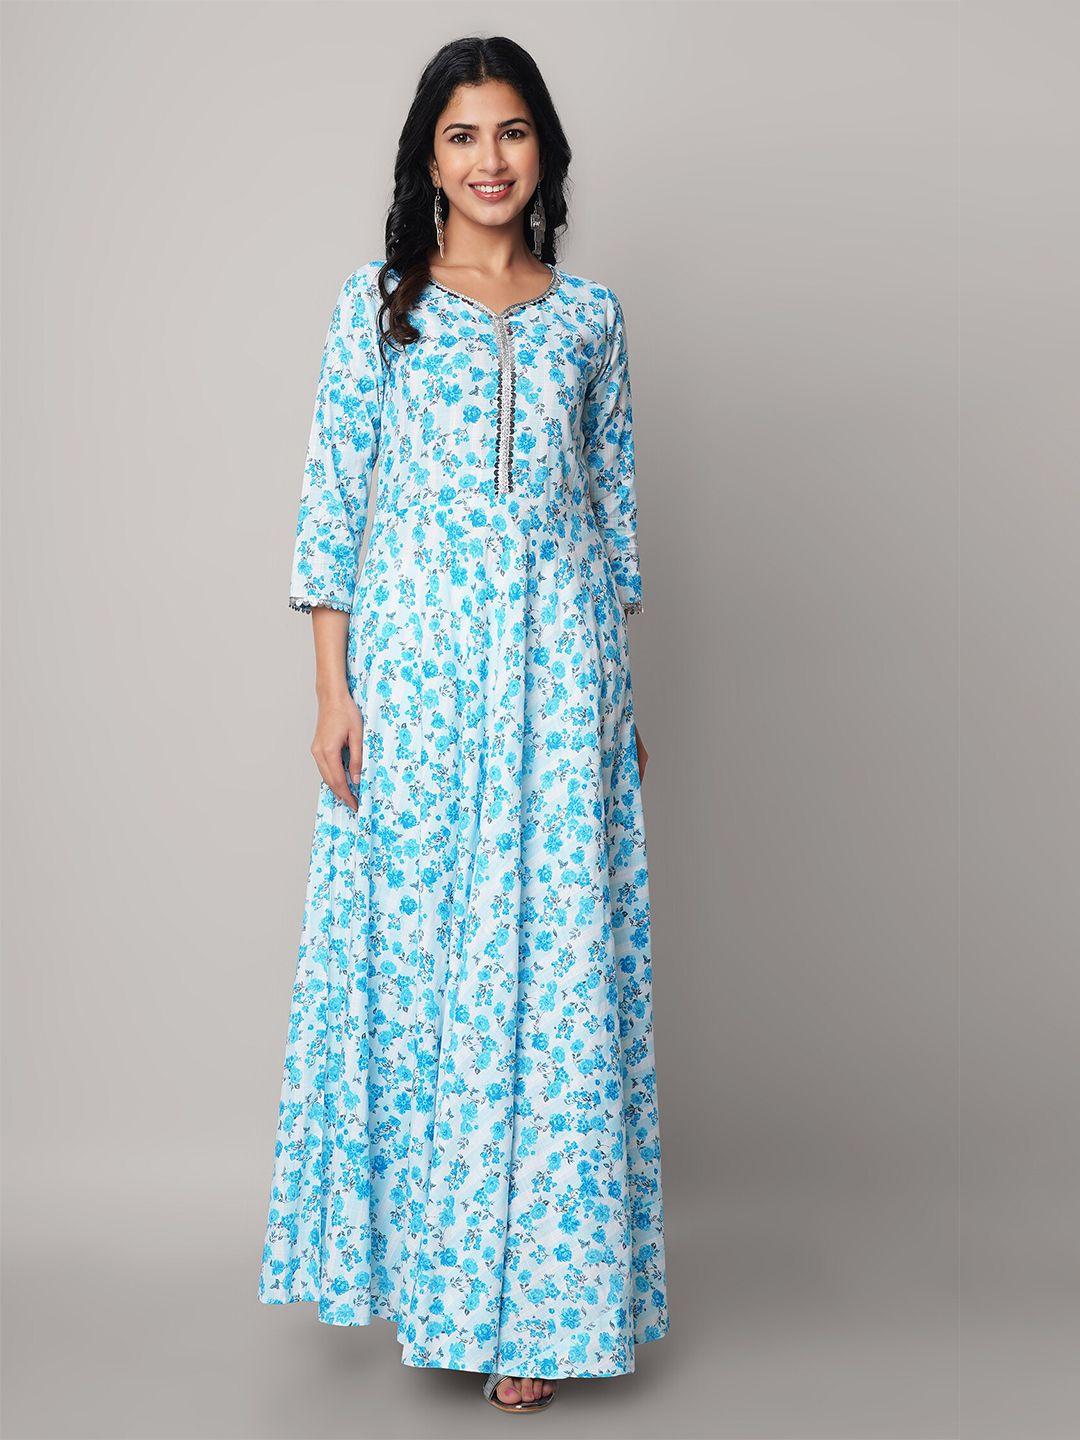 god bless turquoise blue floral rayon ethnic maxi dress